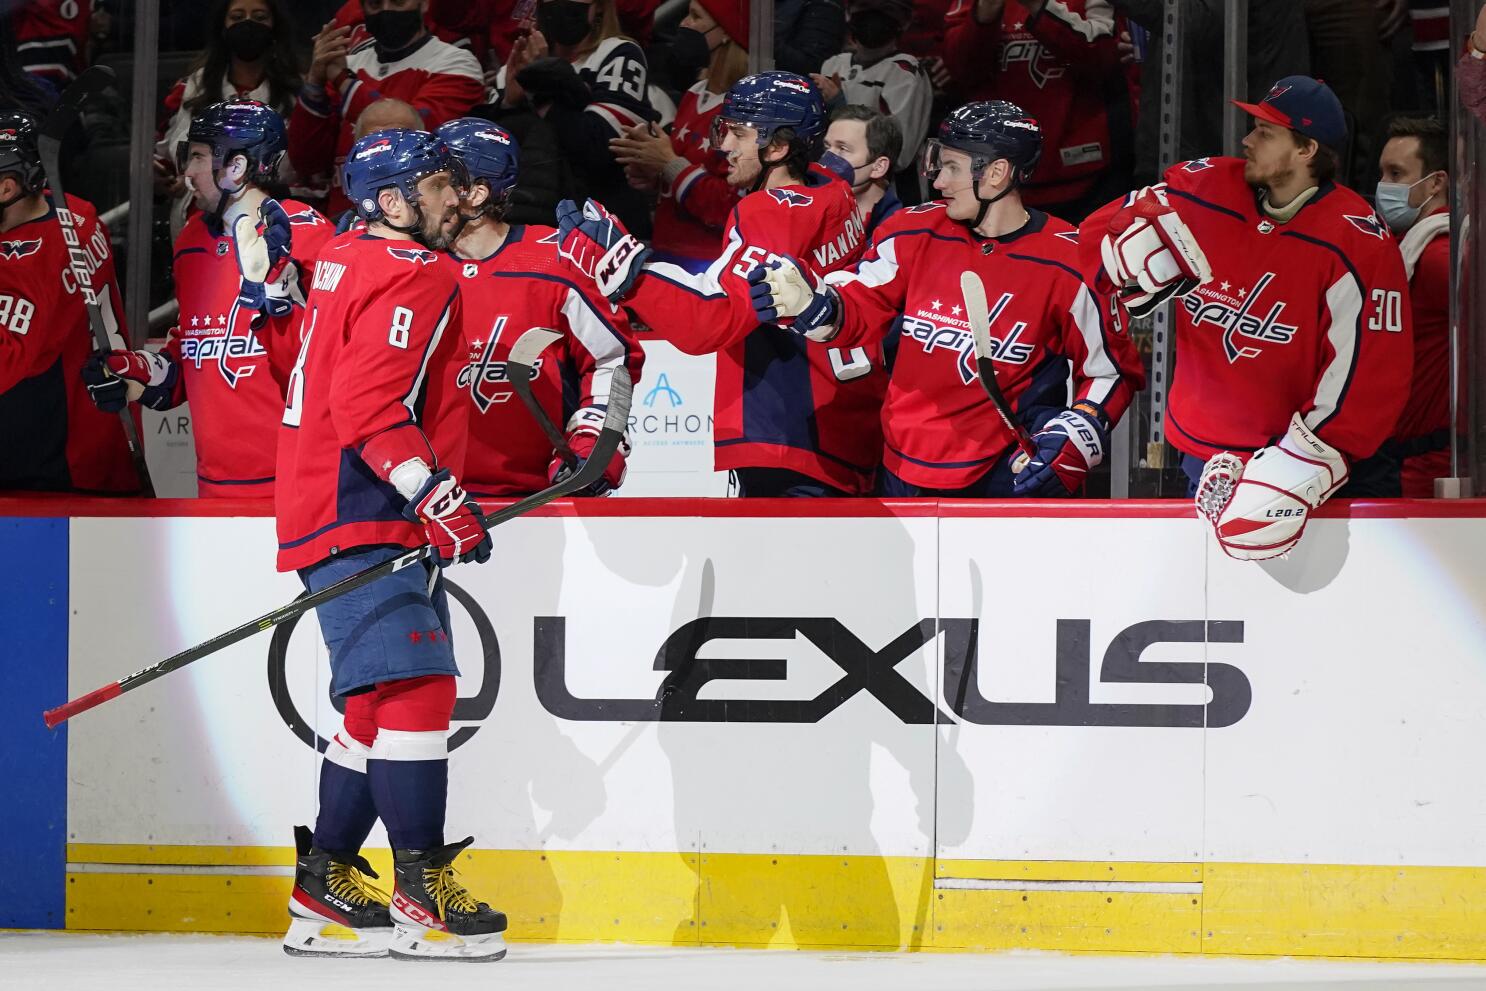 Alex Ovechkin, Evgeny Kuznetsov, and Dmitry Orlov to join Russian national  team on April 30